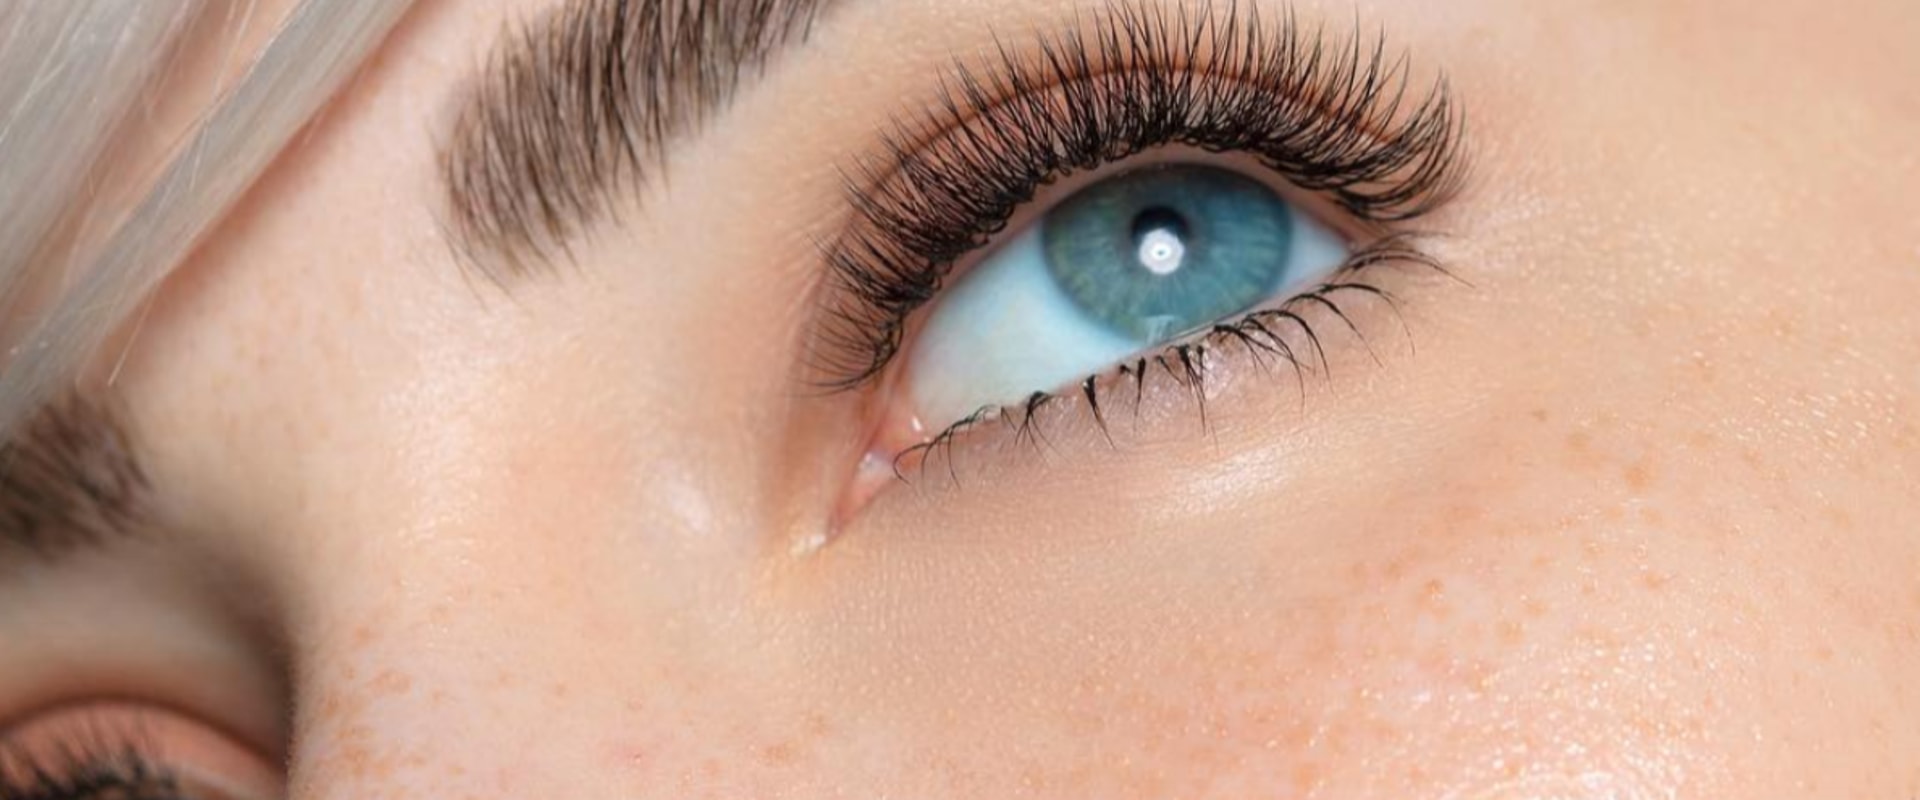 Do eyelashes stop growing with age?